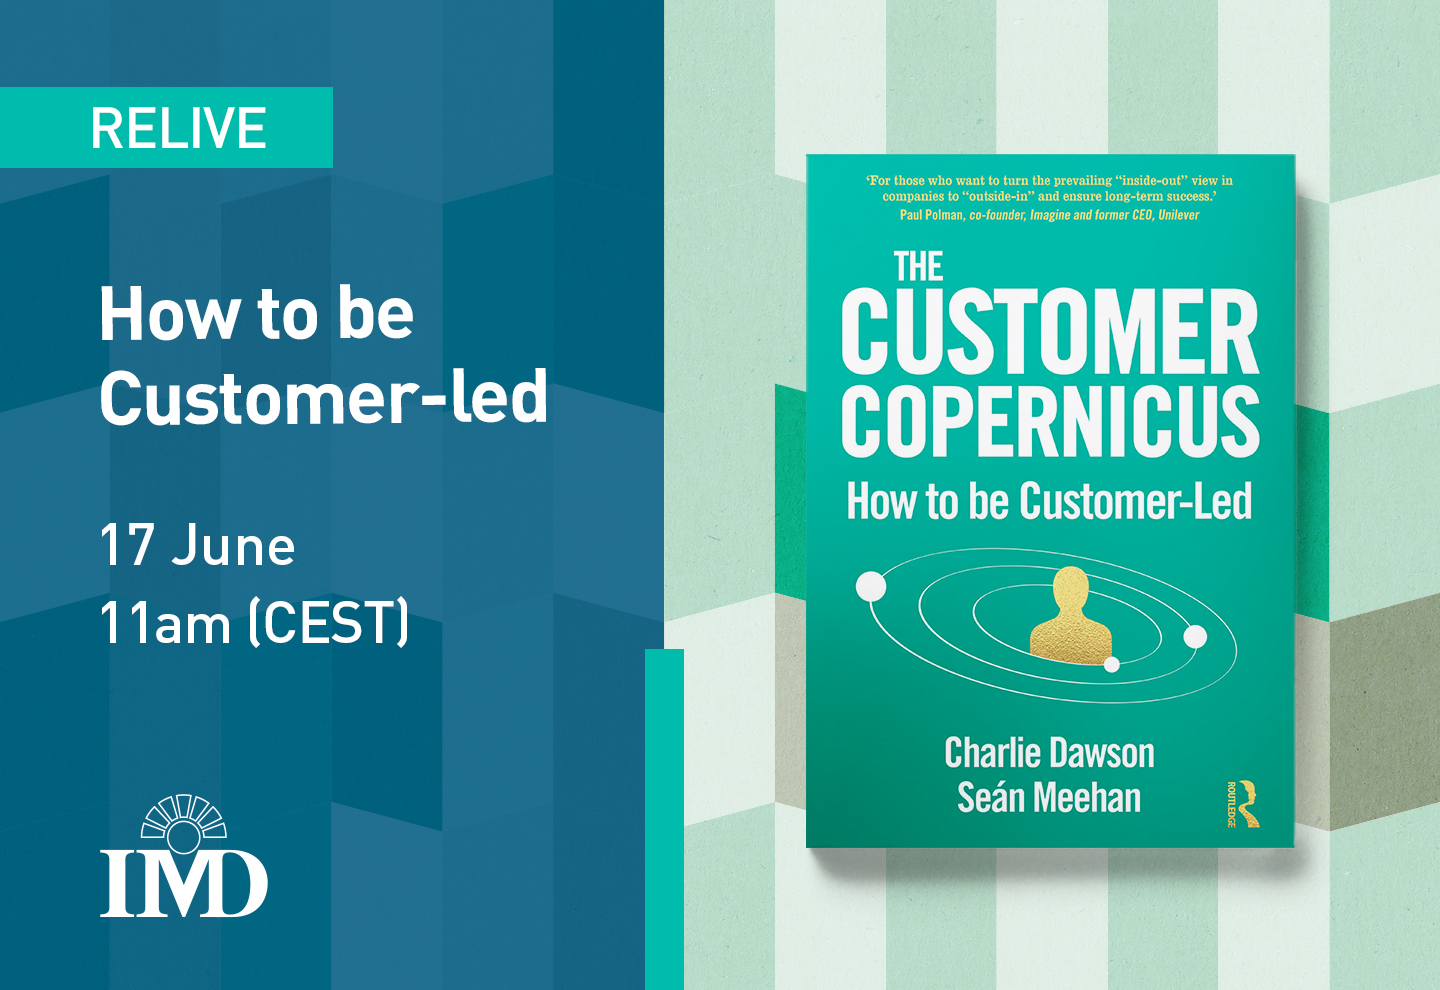 How to create and sustain a customer-led business